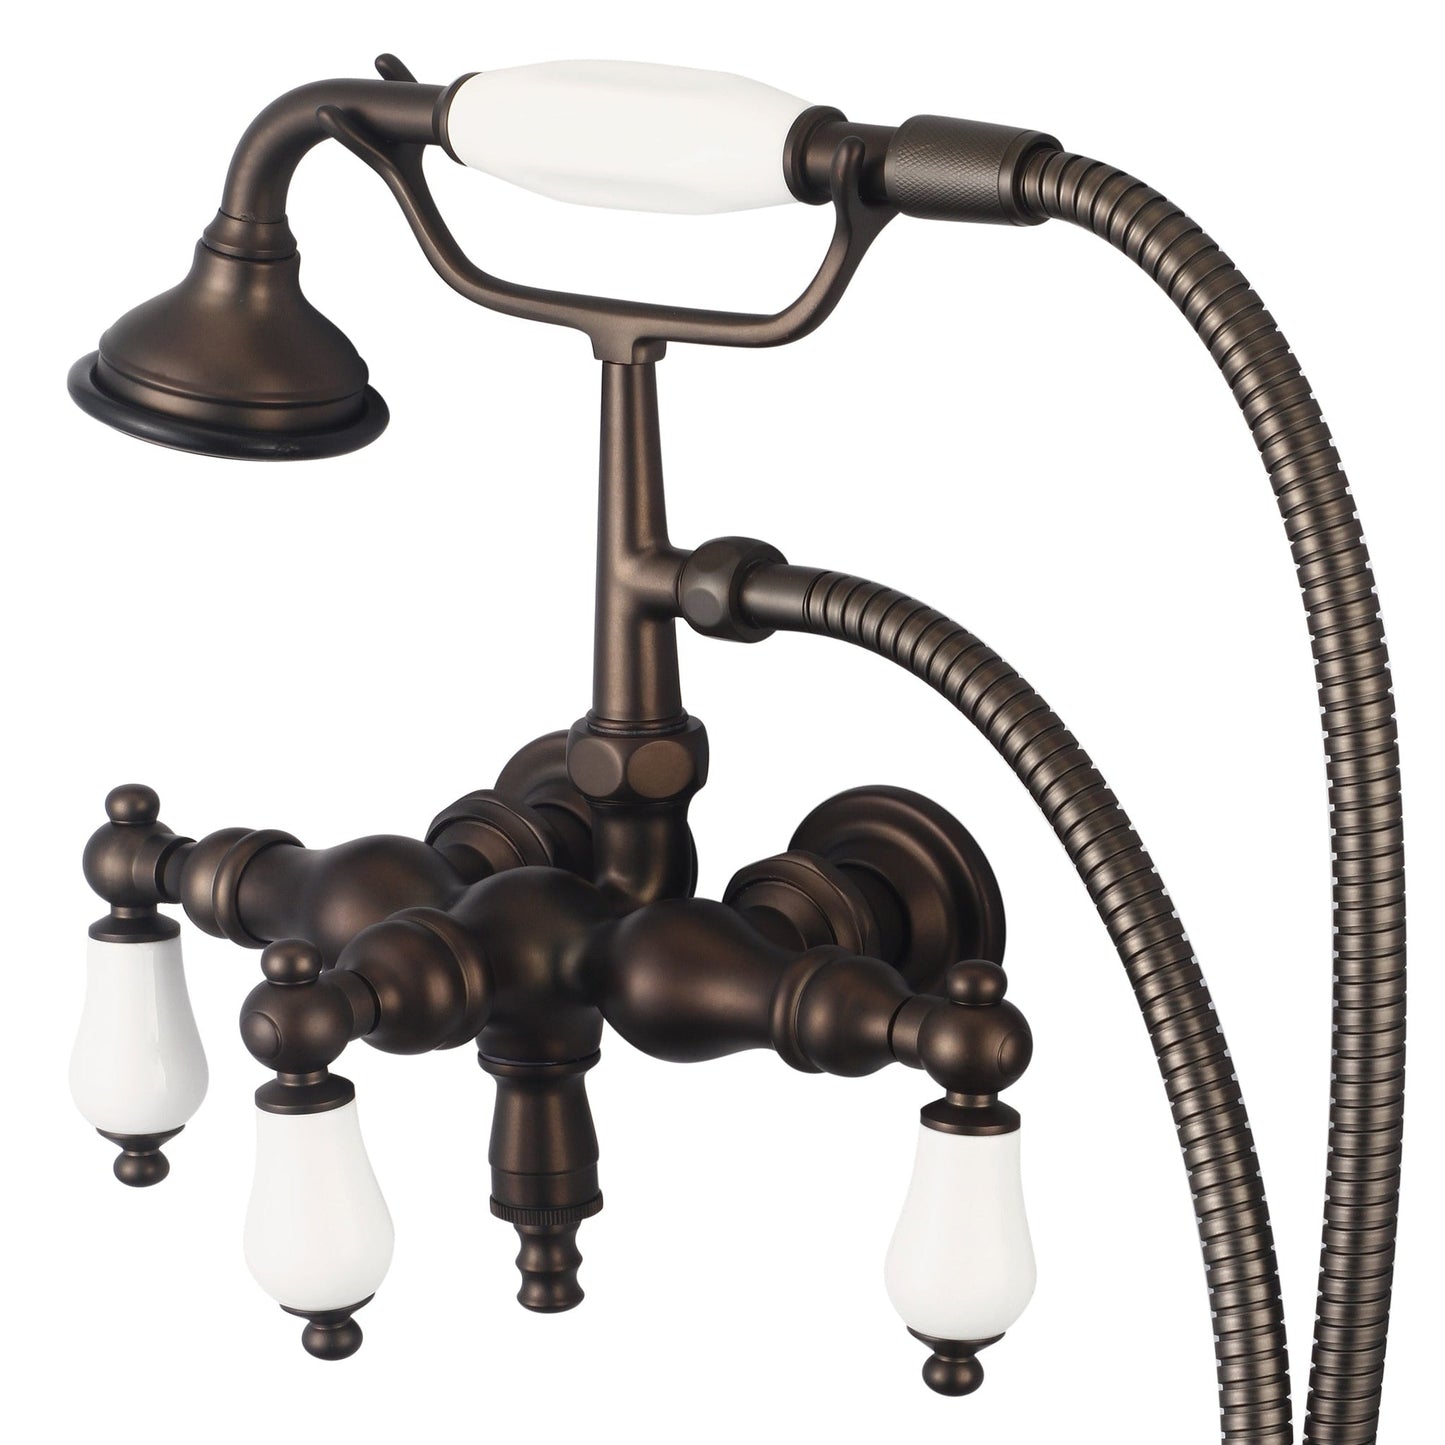 Water Creation Vintage Classic Center Wall Mount Tub F6-0017 9.25" Brown Solid Brass Faucet With Down Spout, Straight Wall Connector And Handheld Shower And Porcelain Lever Handles Without Labels